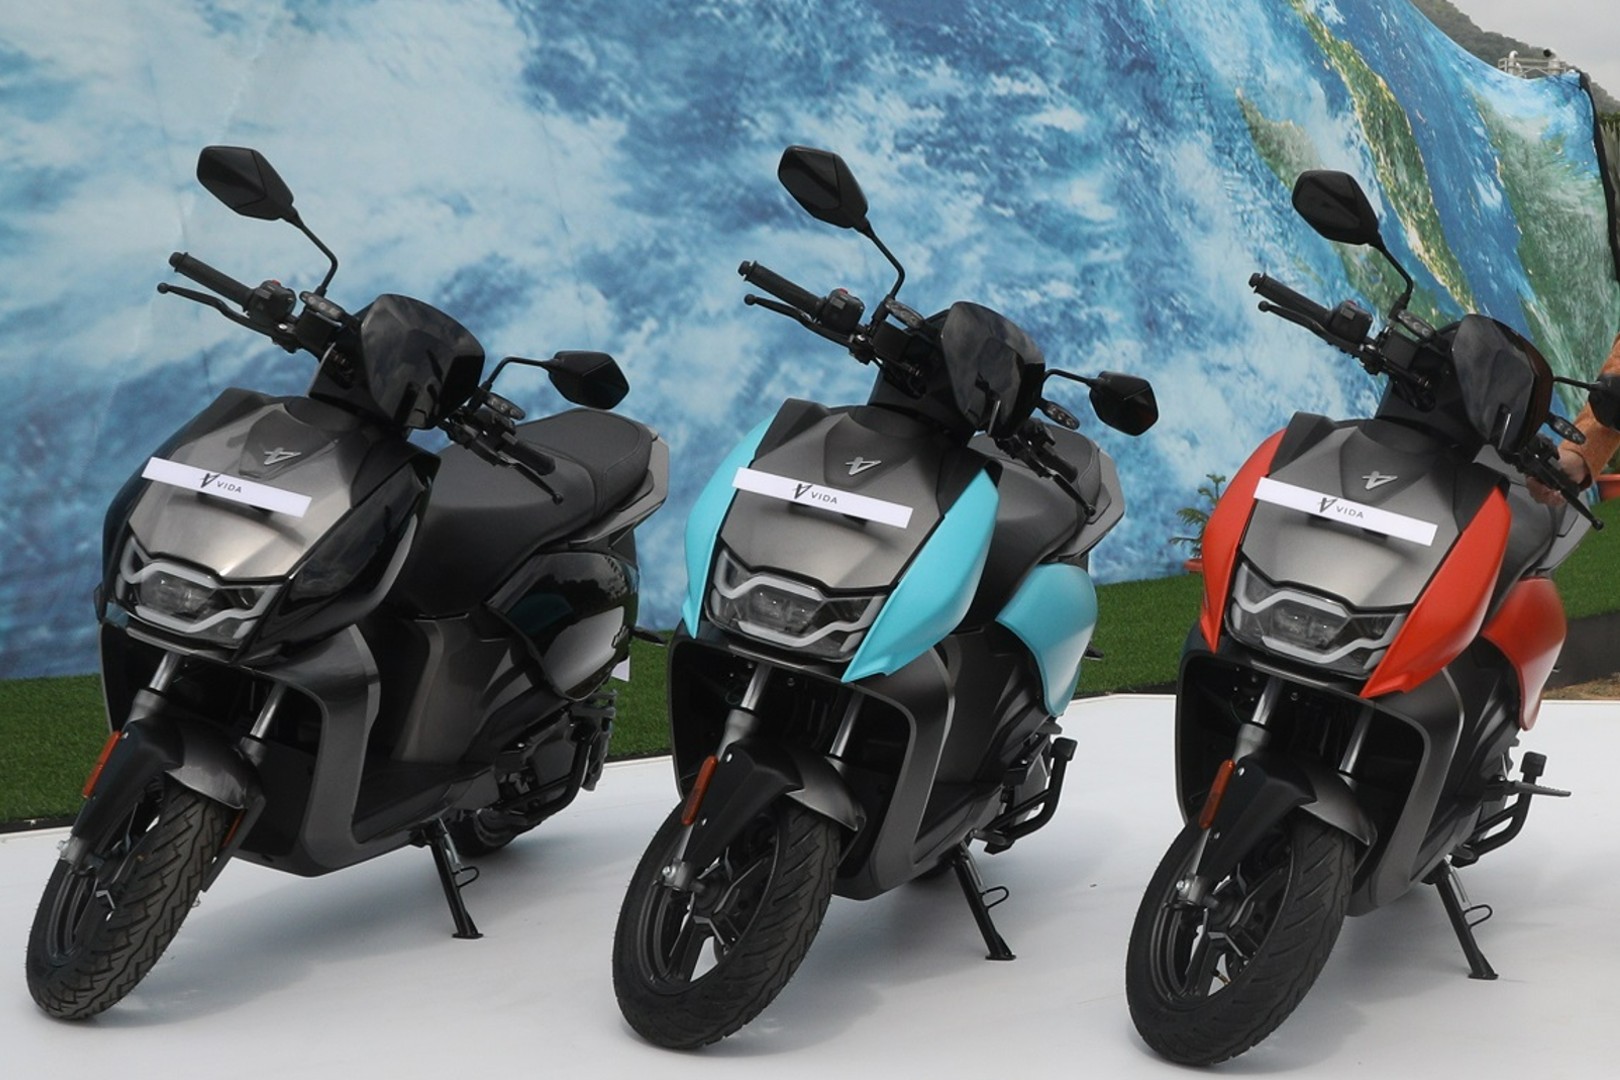 Hero MotoCorp Vida V1 electric scooter launched - Motoring World